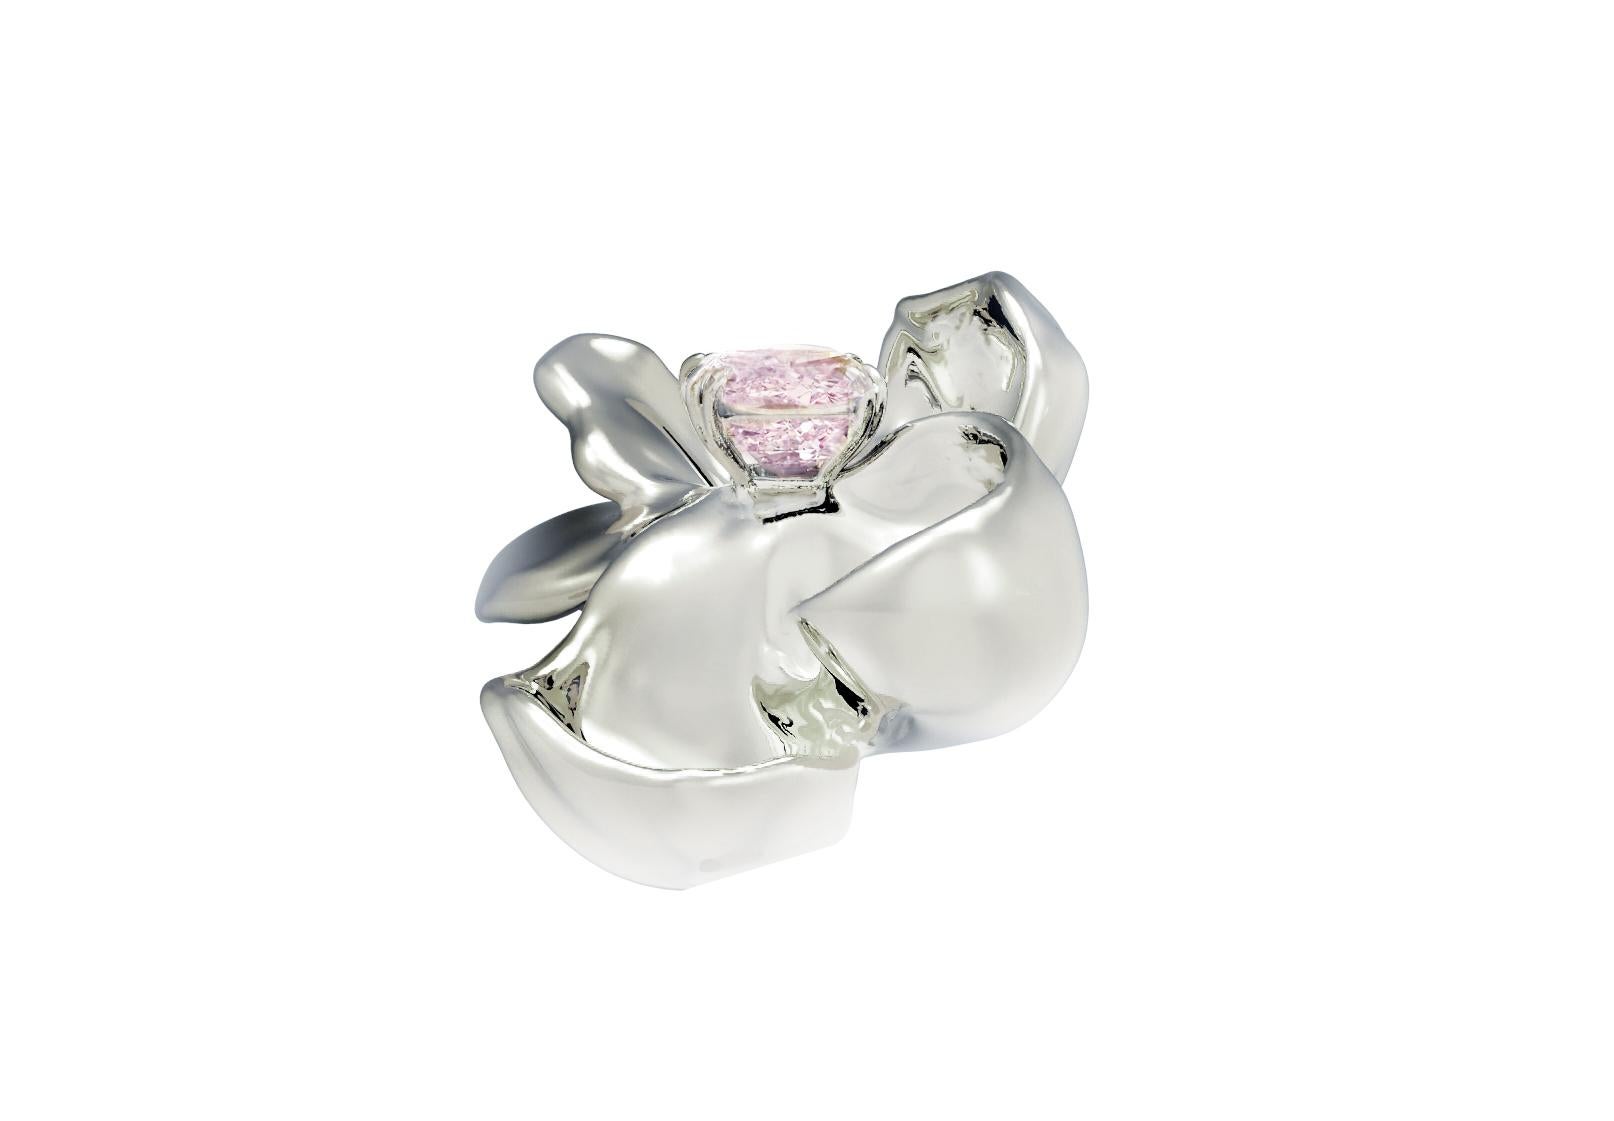 This Magnolia Flower Sculptural brooch is crafted in 18 karat white gold and features a large certified fancy light purplish pink diamond of excellent quality. The crushed ice cushion shape is the artist's favorite for displaying the tender color of